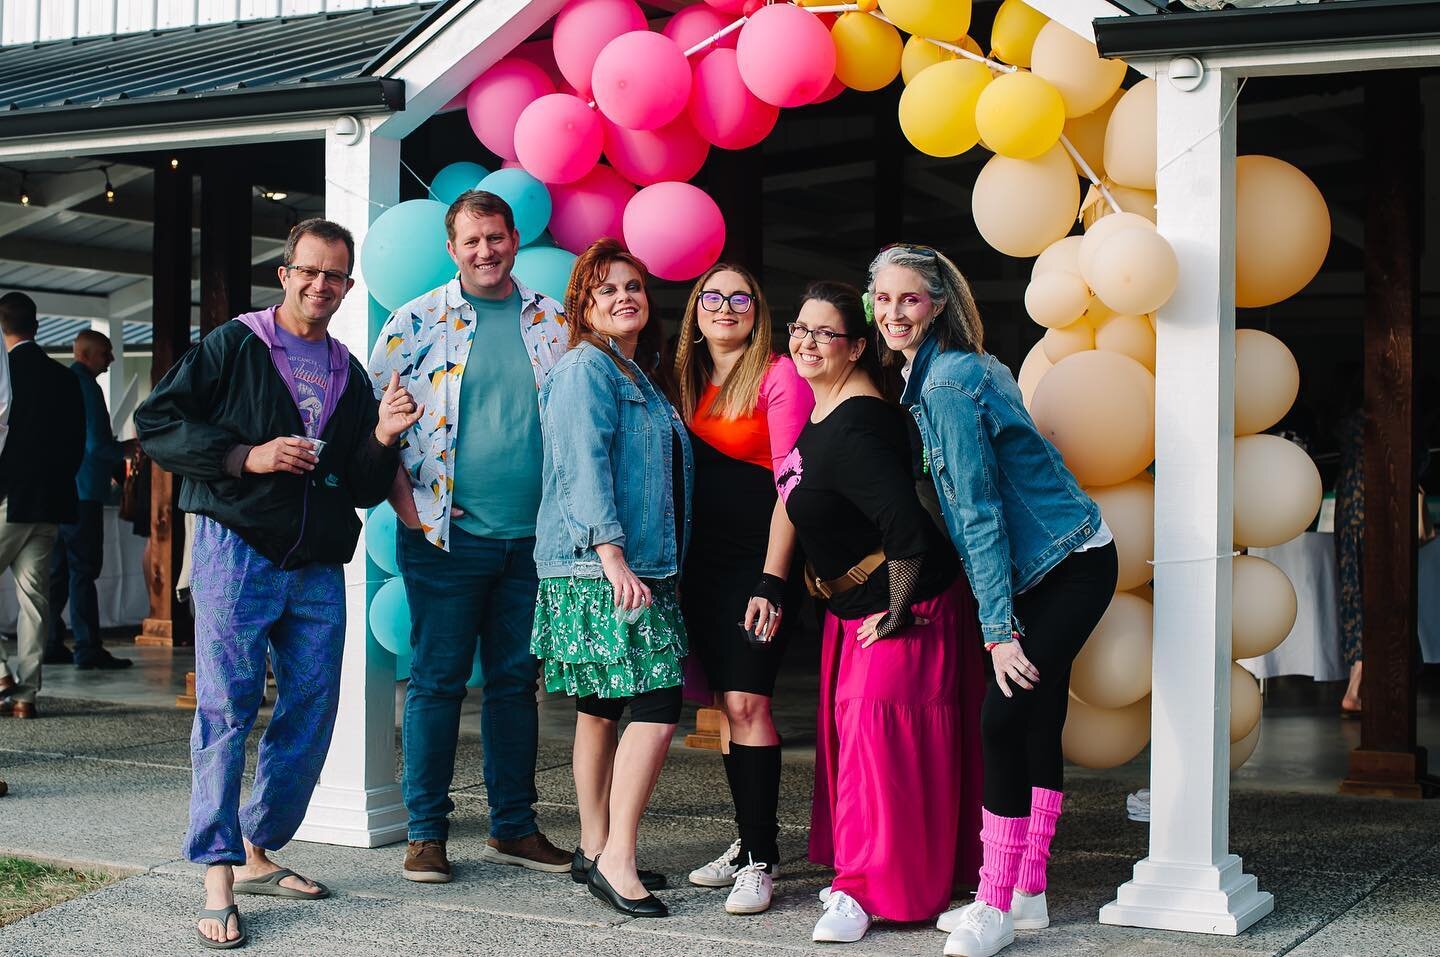 Just reliving all the fun from our Spring Soiree evening with these amazing photos by @janelle.s.roberts! Follow us on Facebook to see the full album. Be sure to SAVE THE DATE for next year&rsquo;s big event! May 11, 2024. We can&rsquo;t wait!